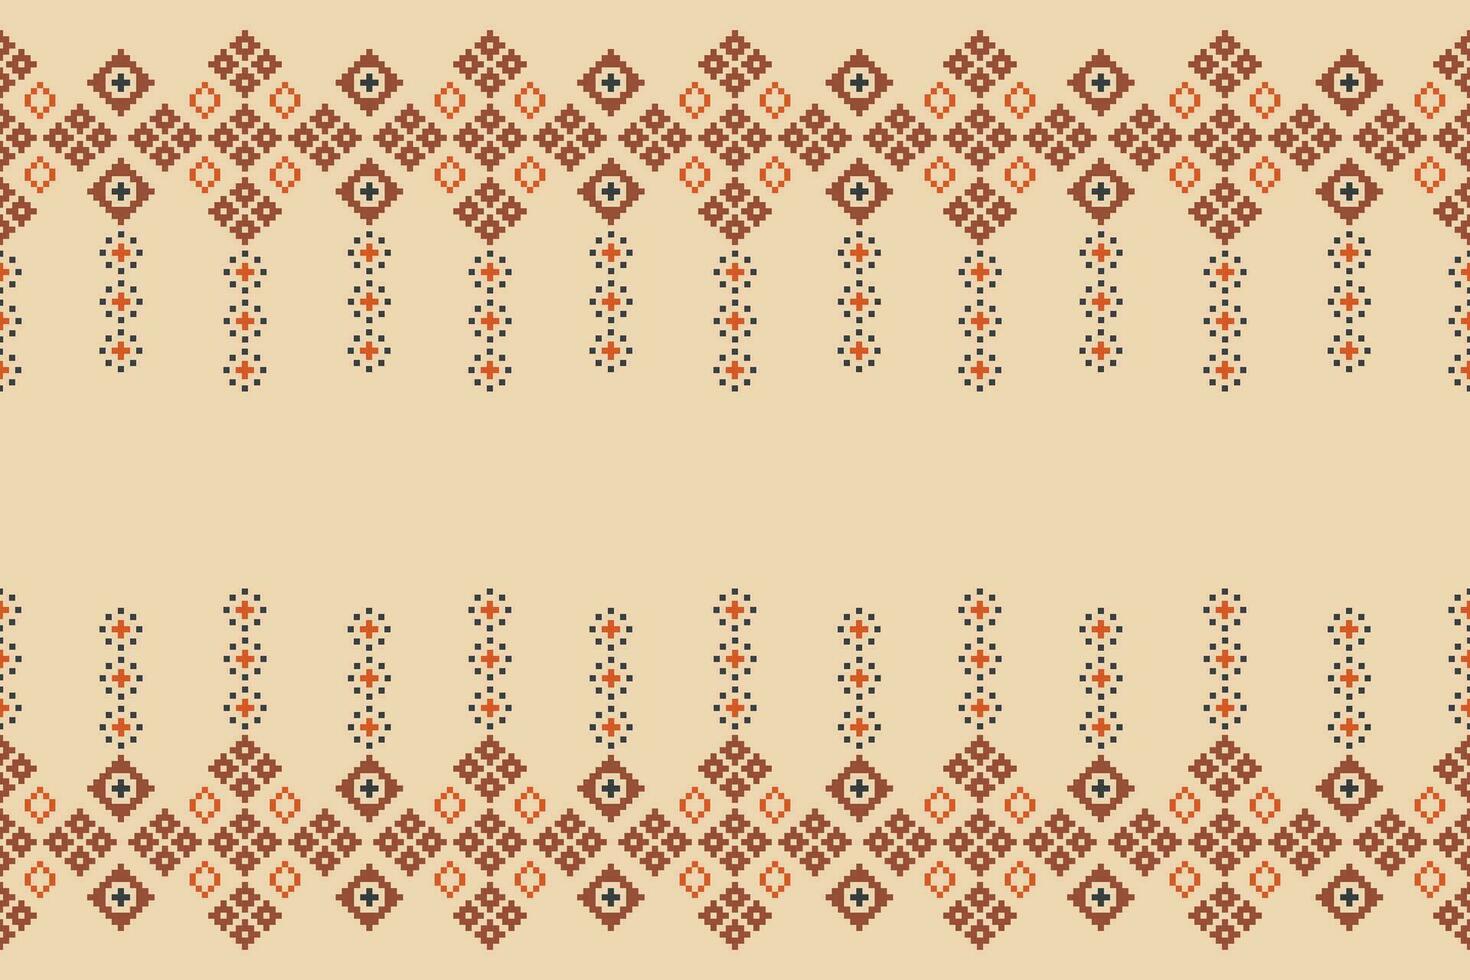 Ethnic geometric fabric pattern Cross Stitch.Ikat embroidery Ethnic oriental Pixel pattern brown cream background. Abstract,vector,illustration. Texture,frame,decoration,motifs,silk wallpaper. vector